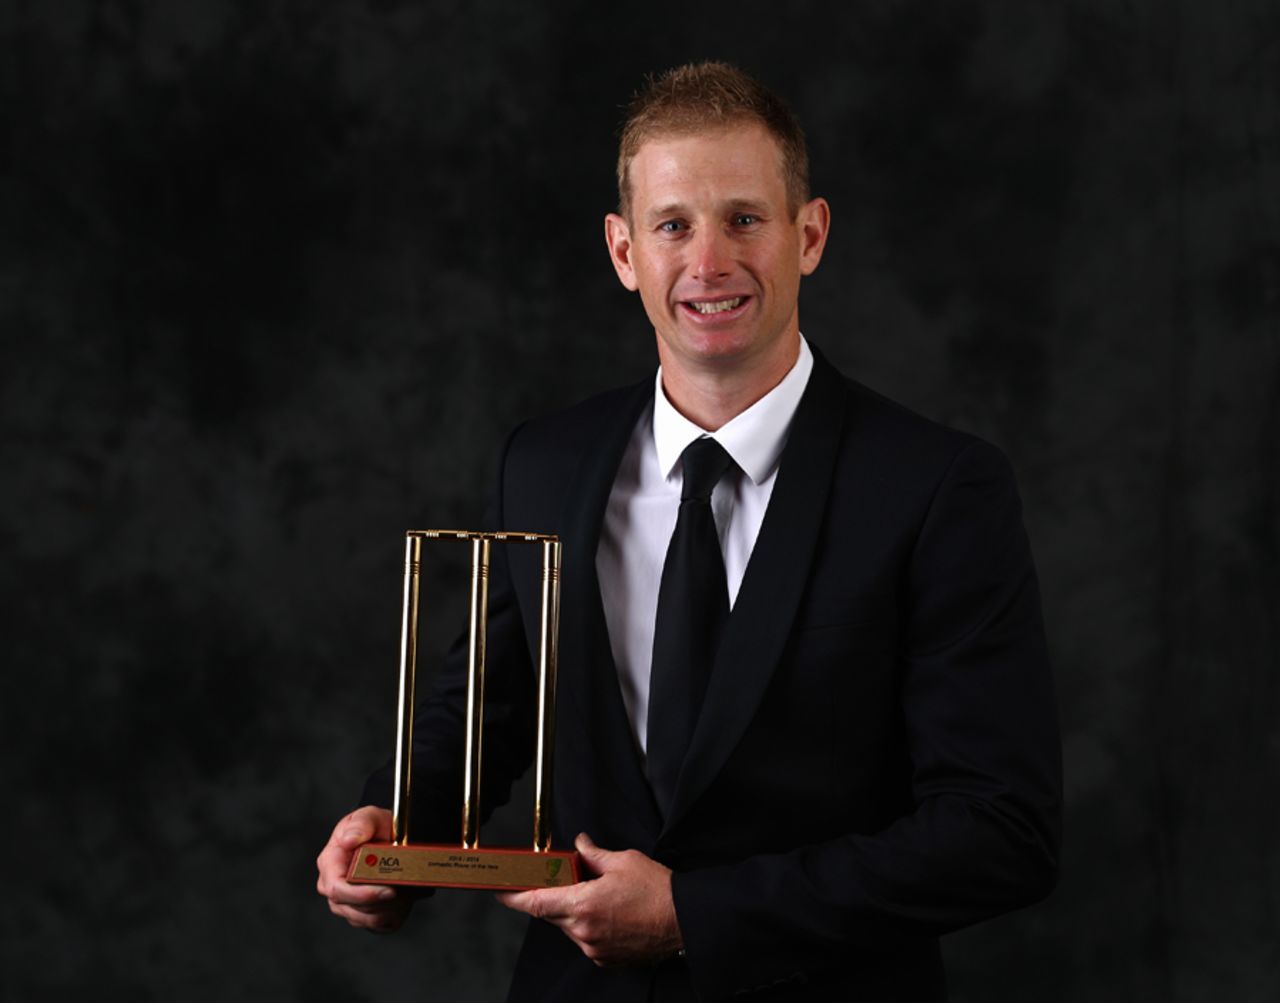 Adam Voges was named Australia's Domestic Player of the Year, Melbourne, January 27, 2016